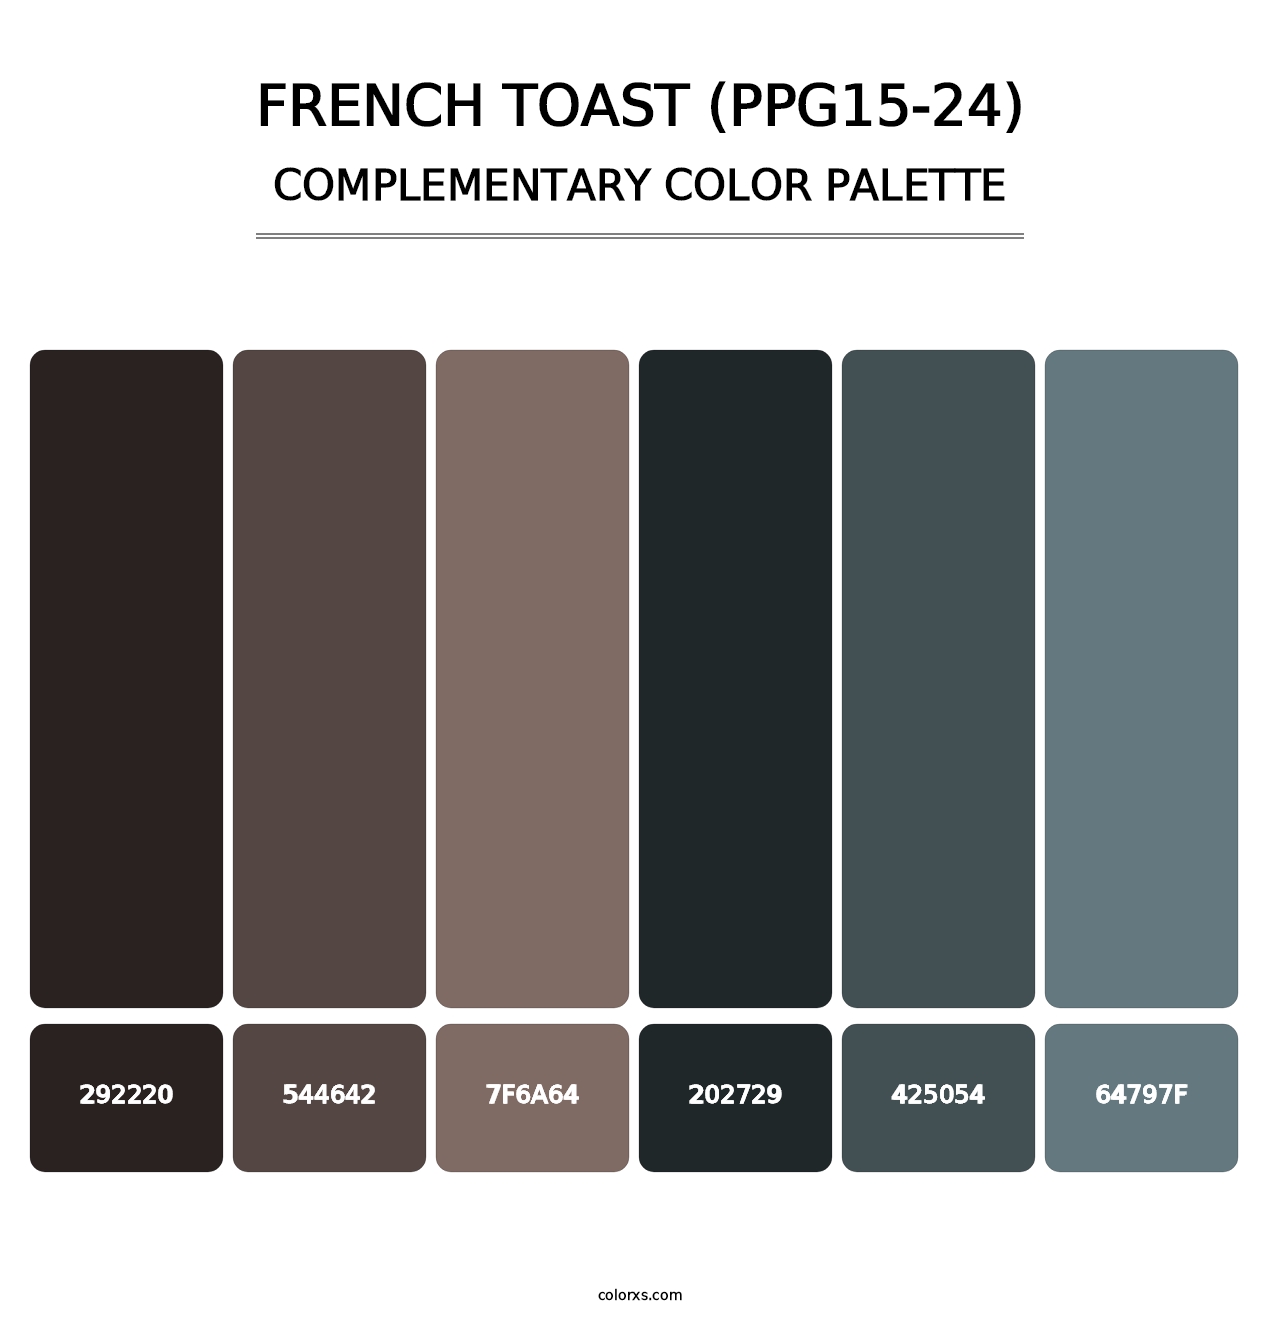 French Toast (PPG15-24) - Complementary Color Palette